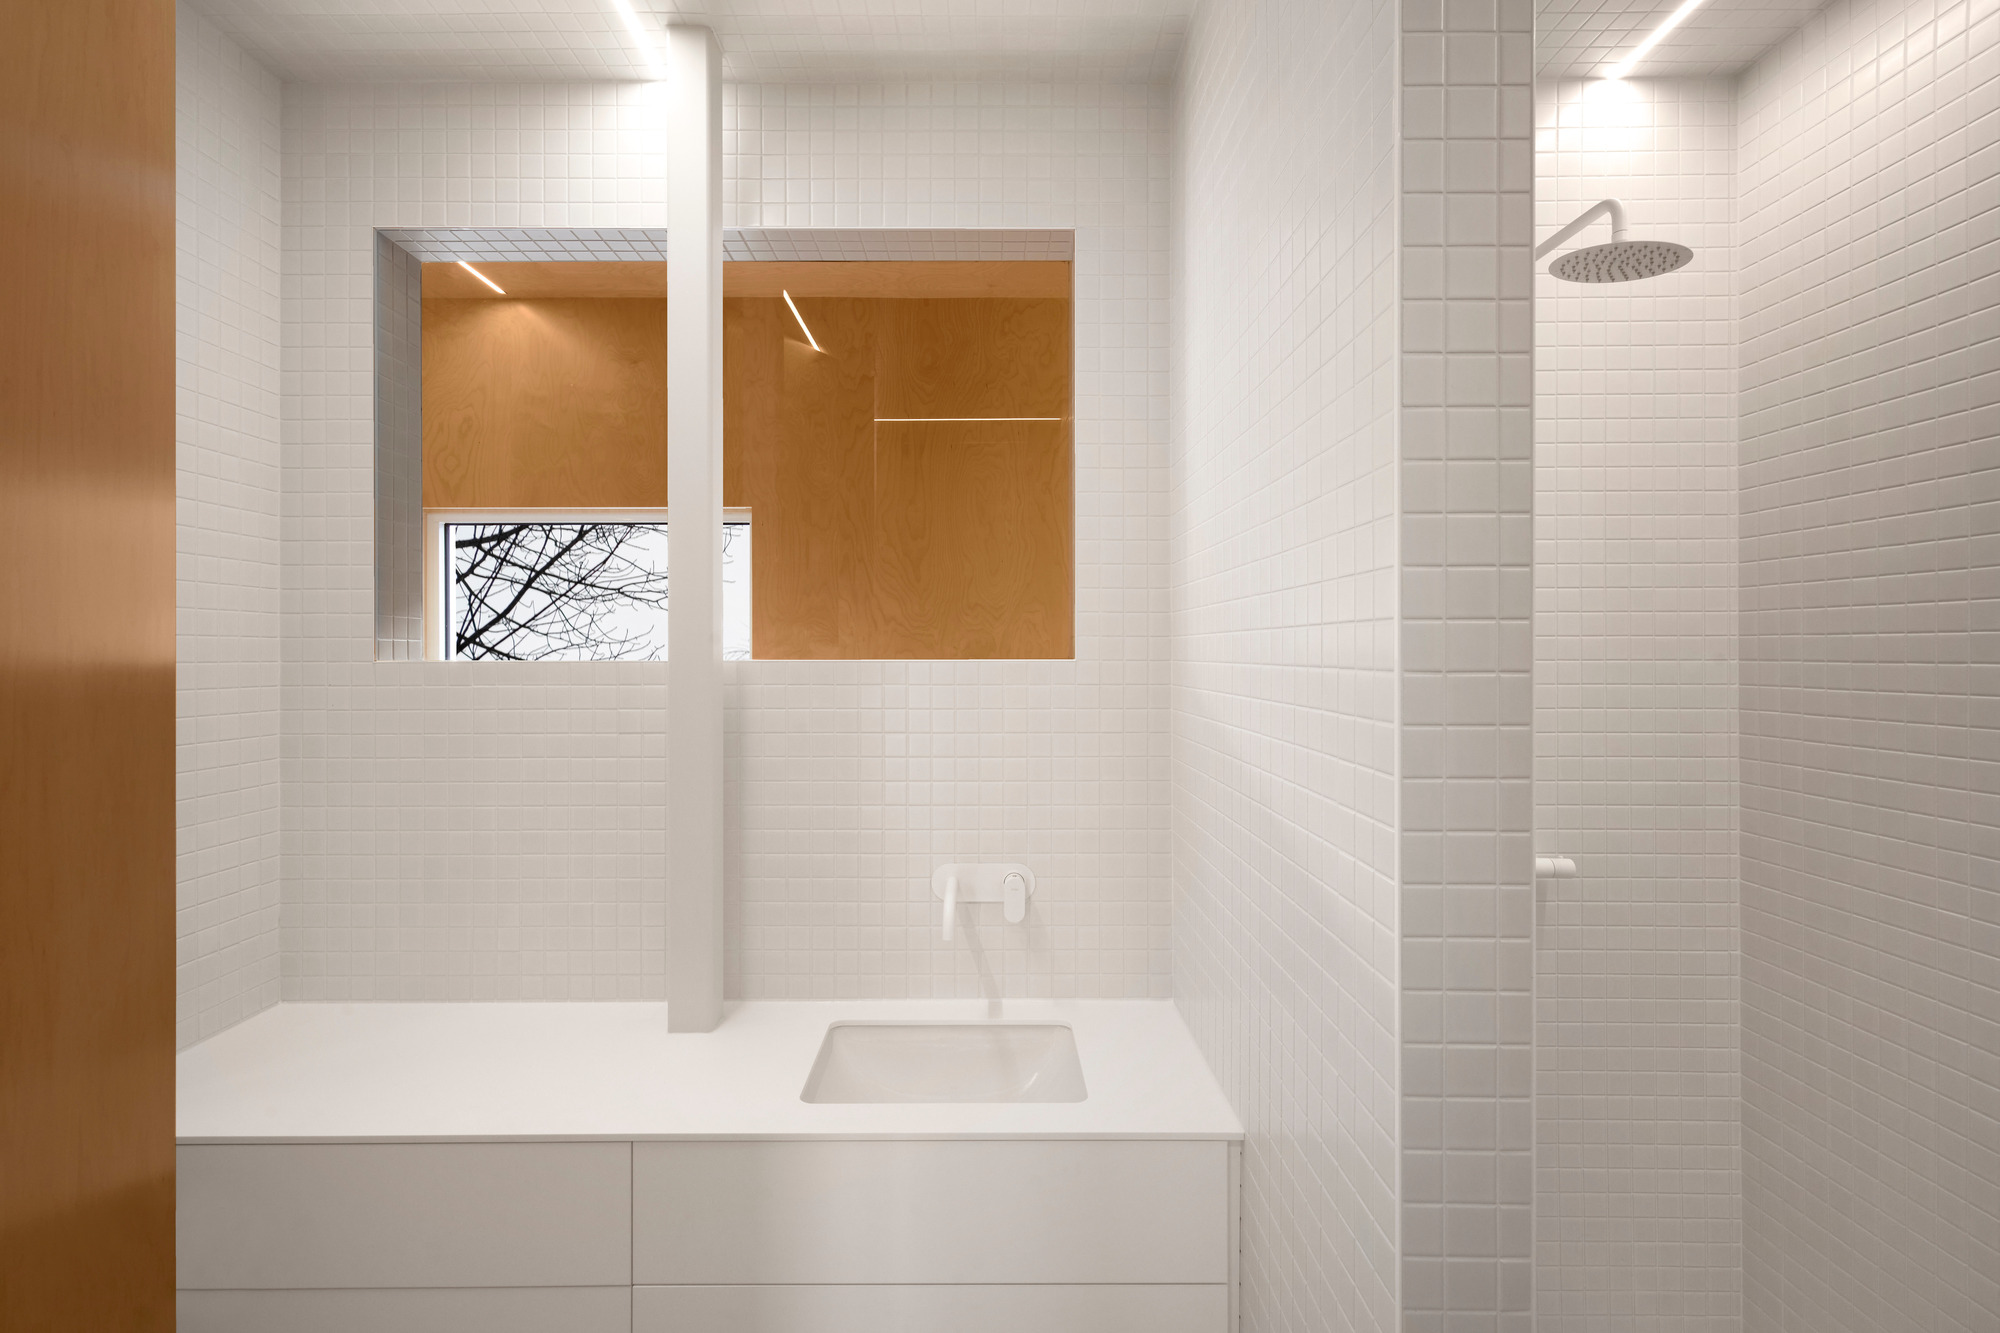 the white bathroom that contrasting with the color of the plywood